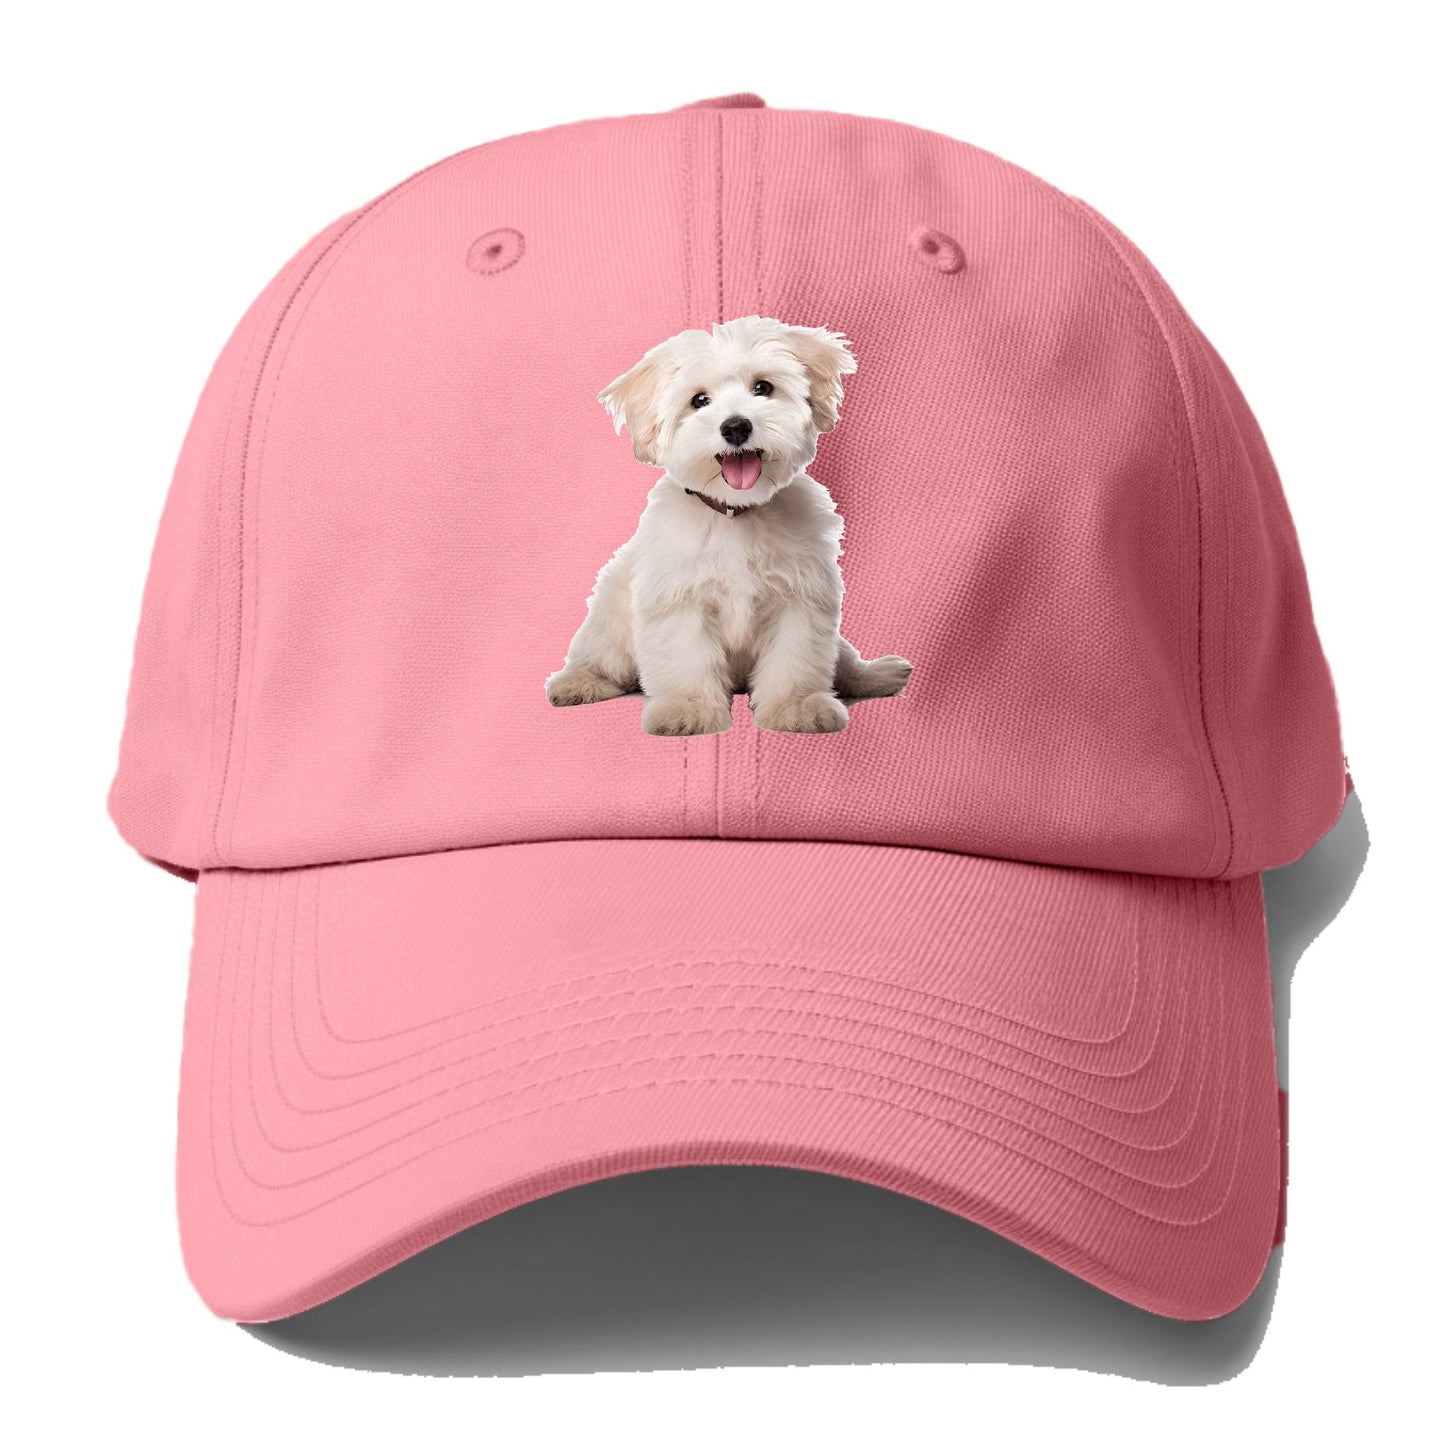 Adorable white puppy Hat